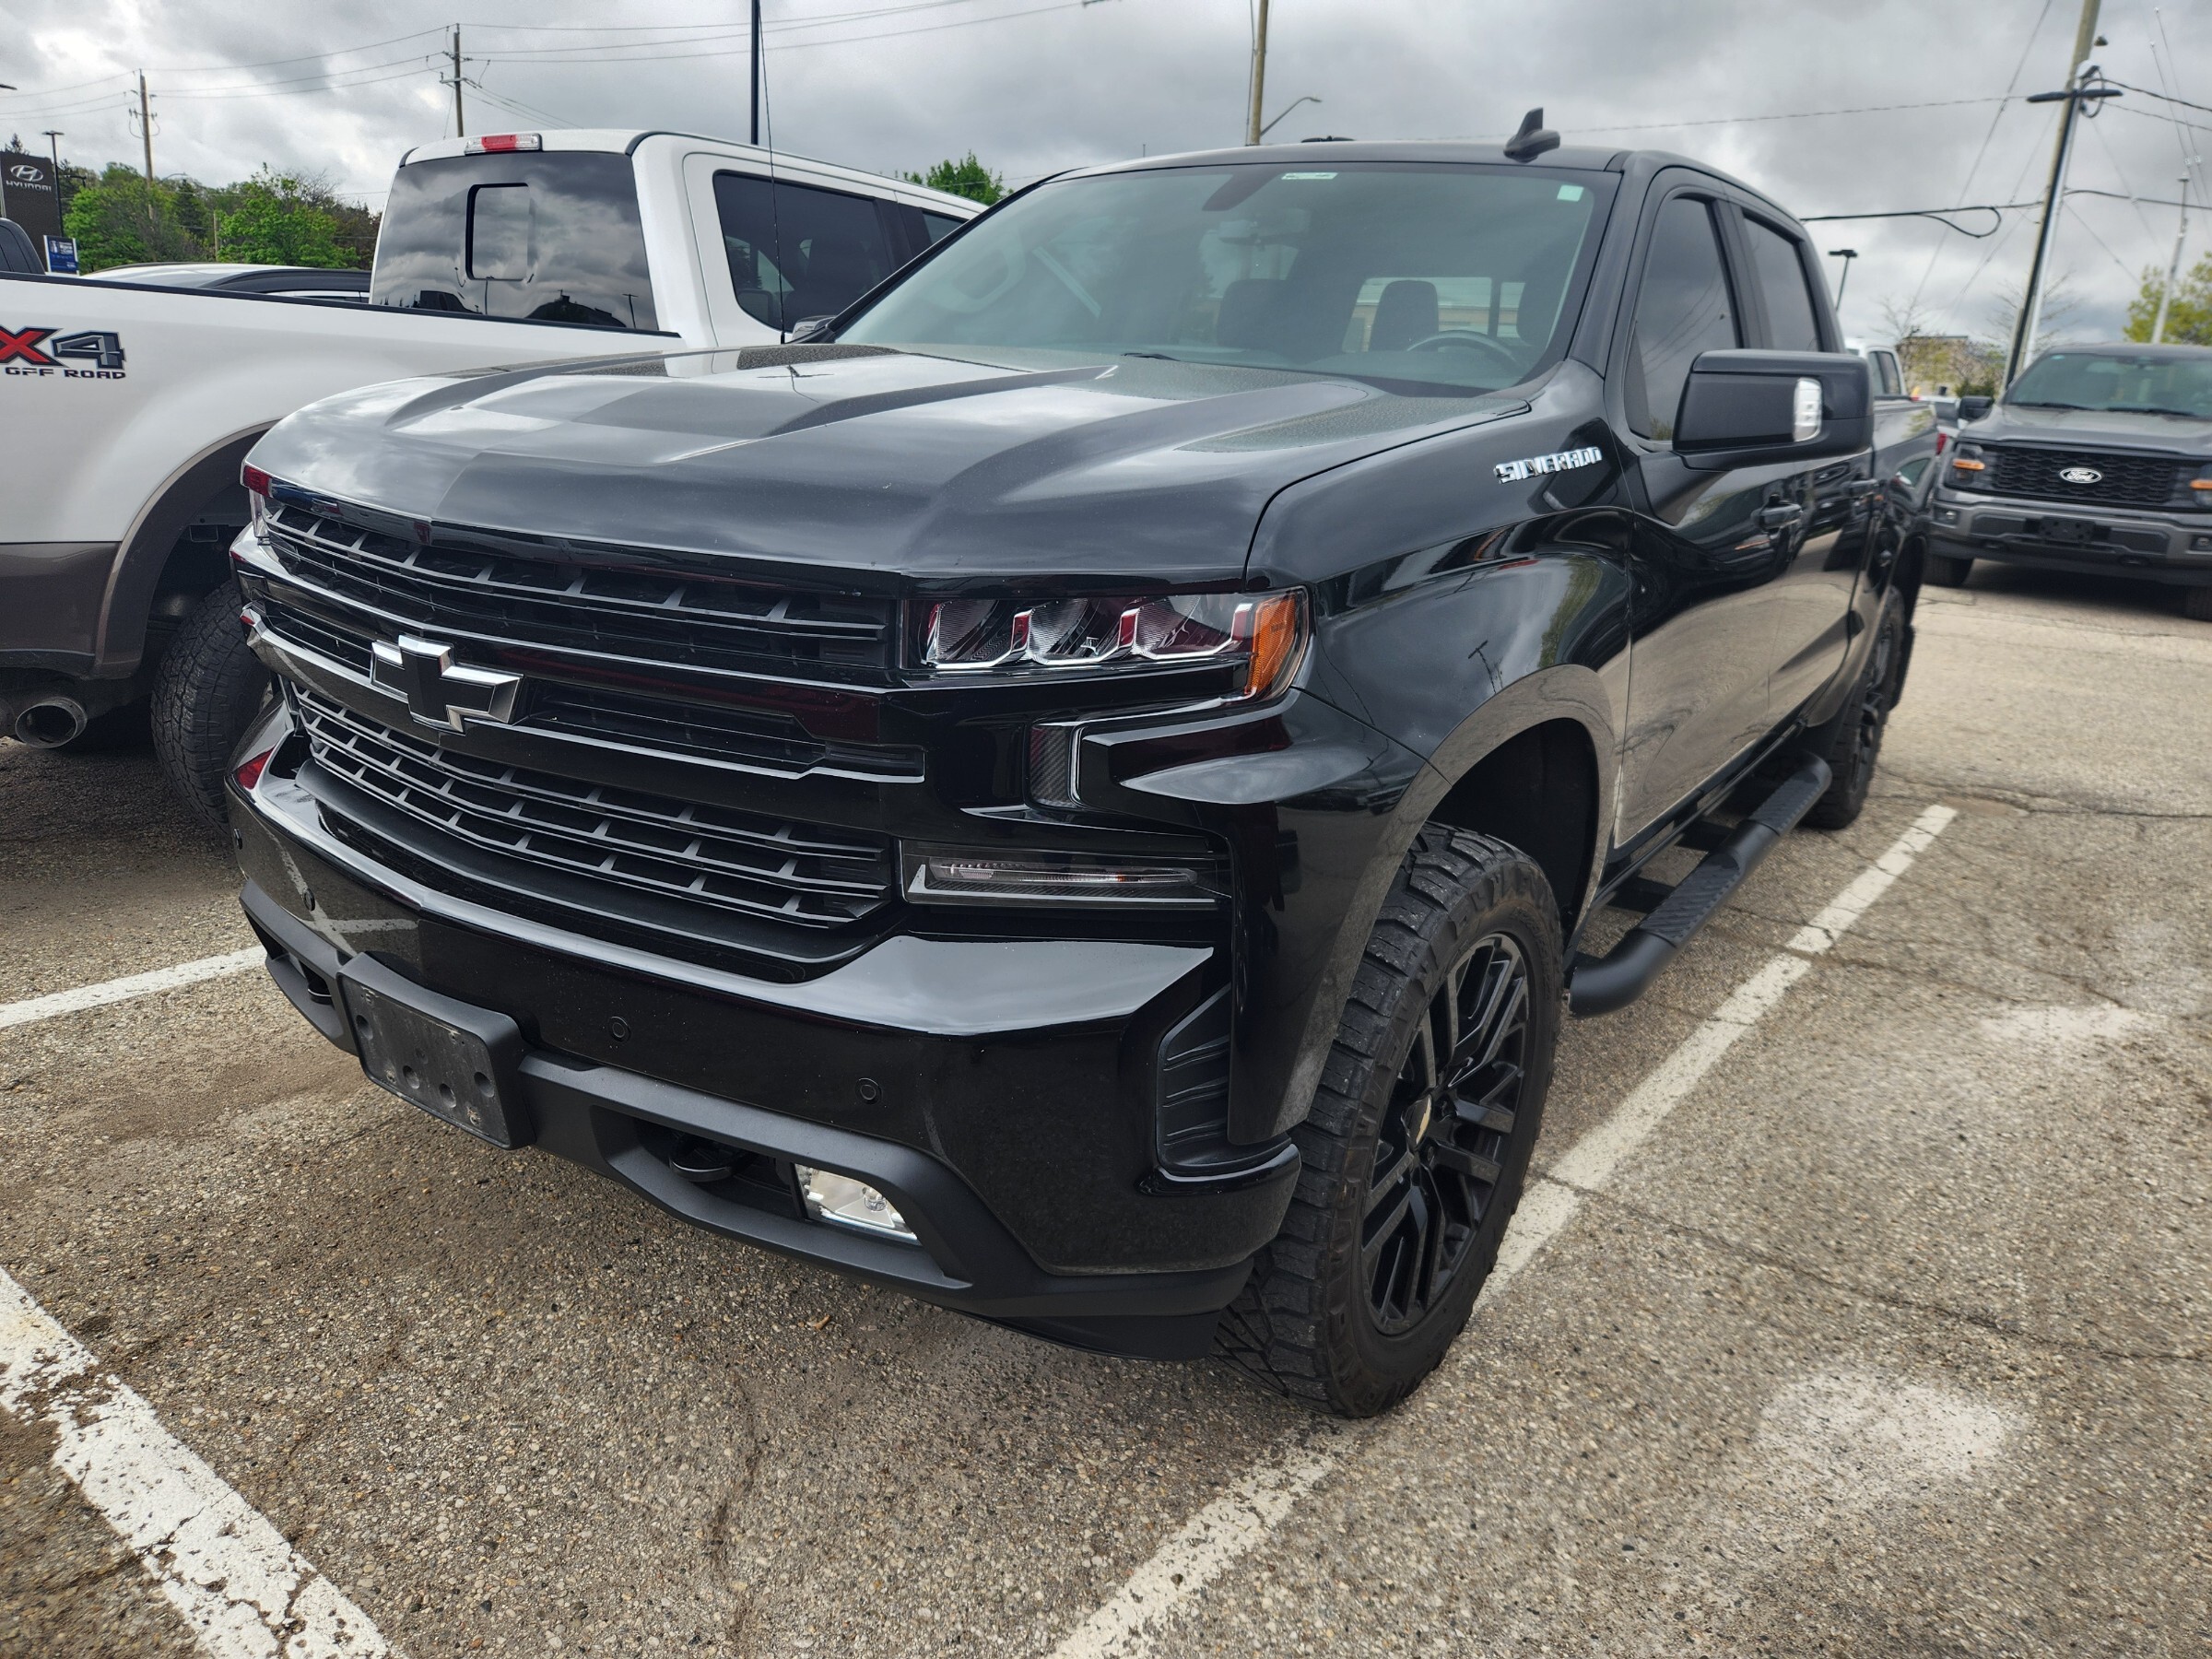 2019 Chevrolet Silverado 1500 RST LEATHER | UPGRADED TIRES | BOSE SOUND SYSTEM |